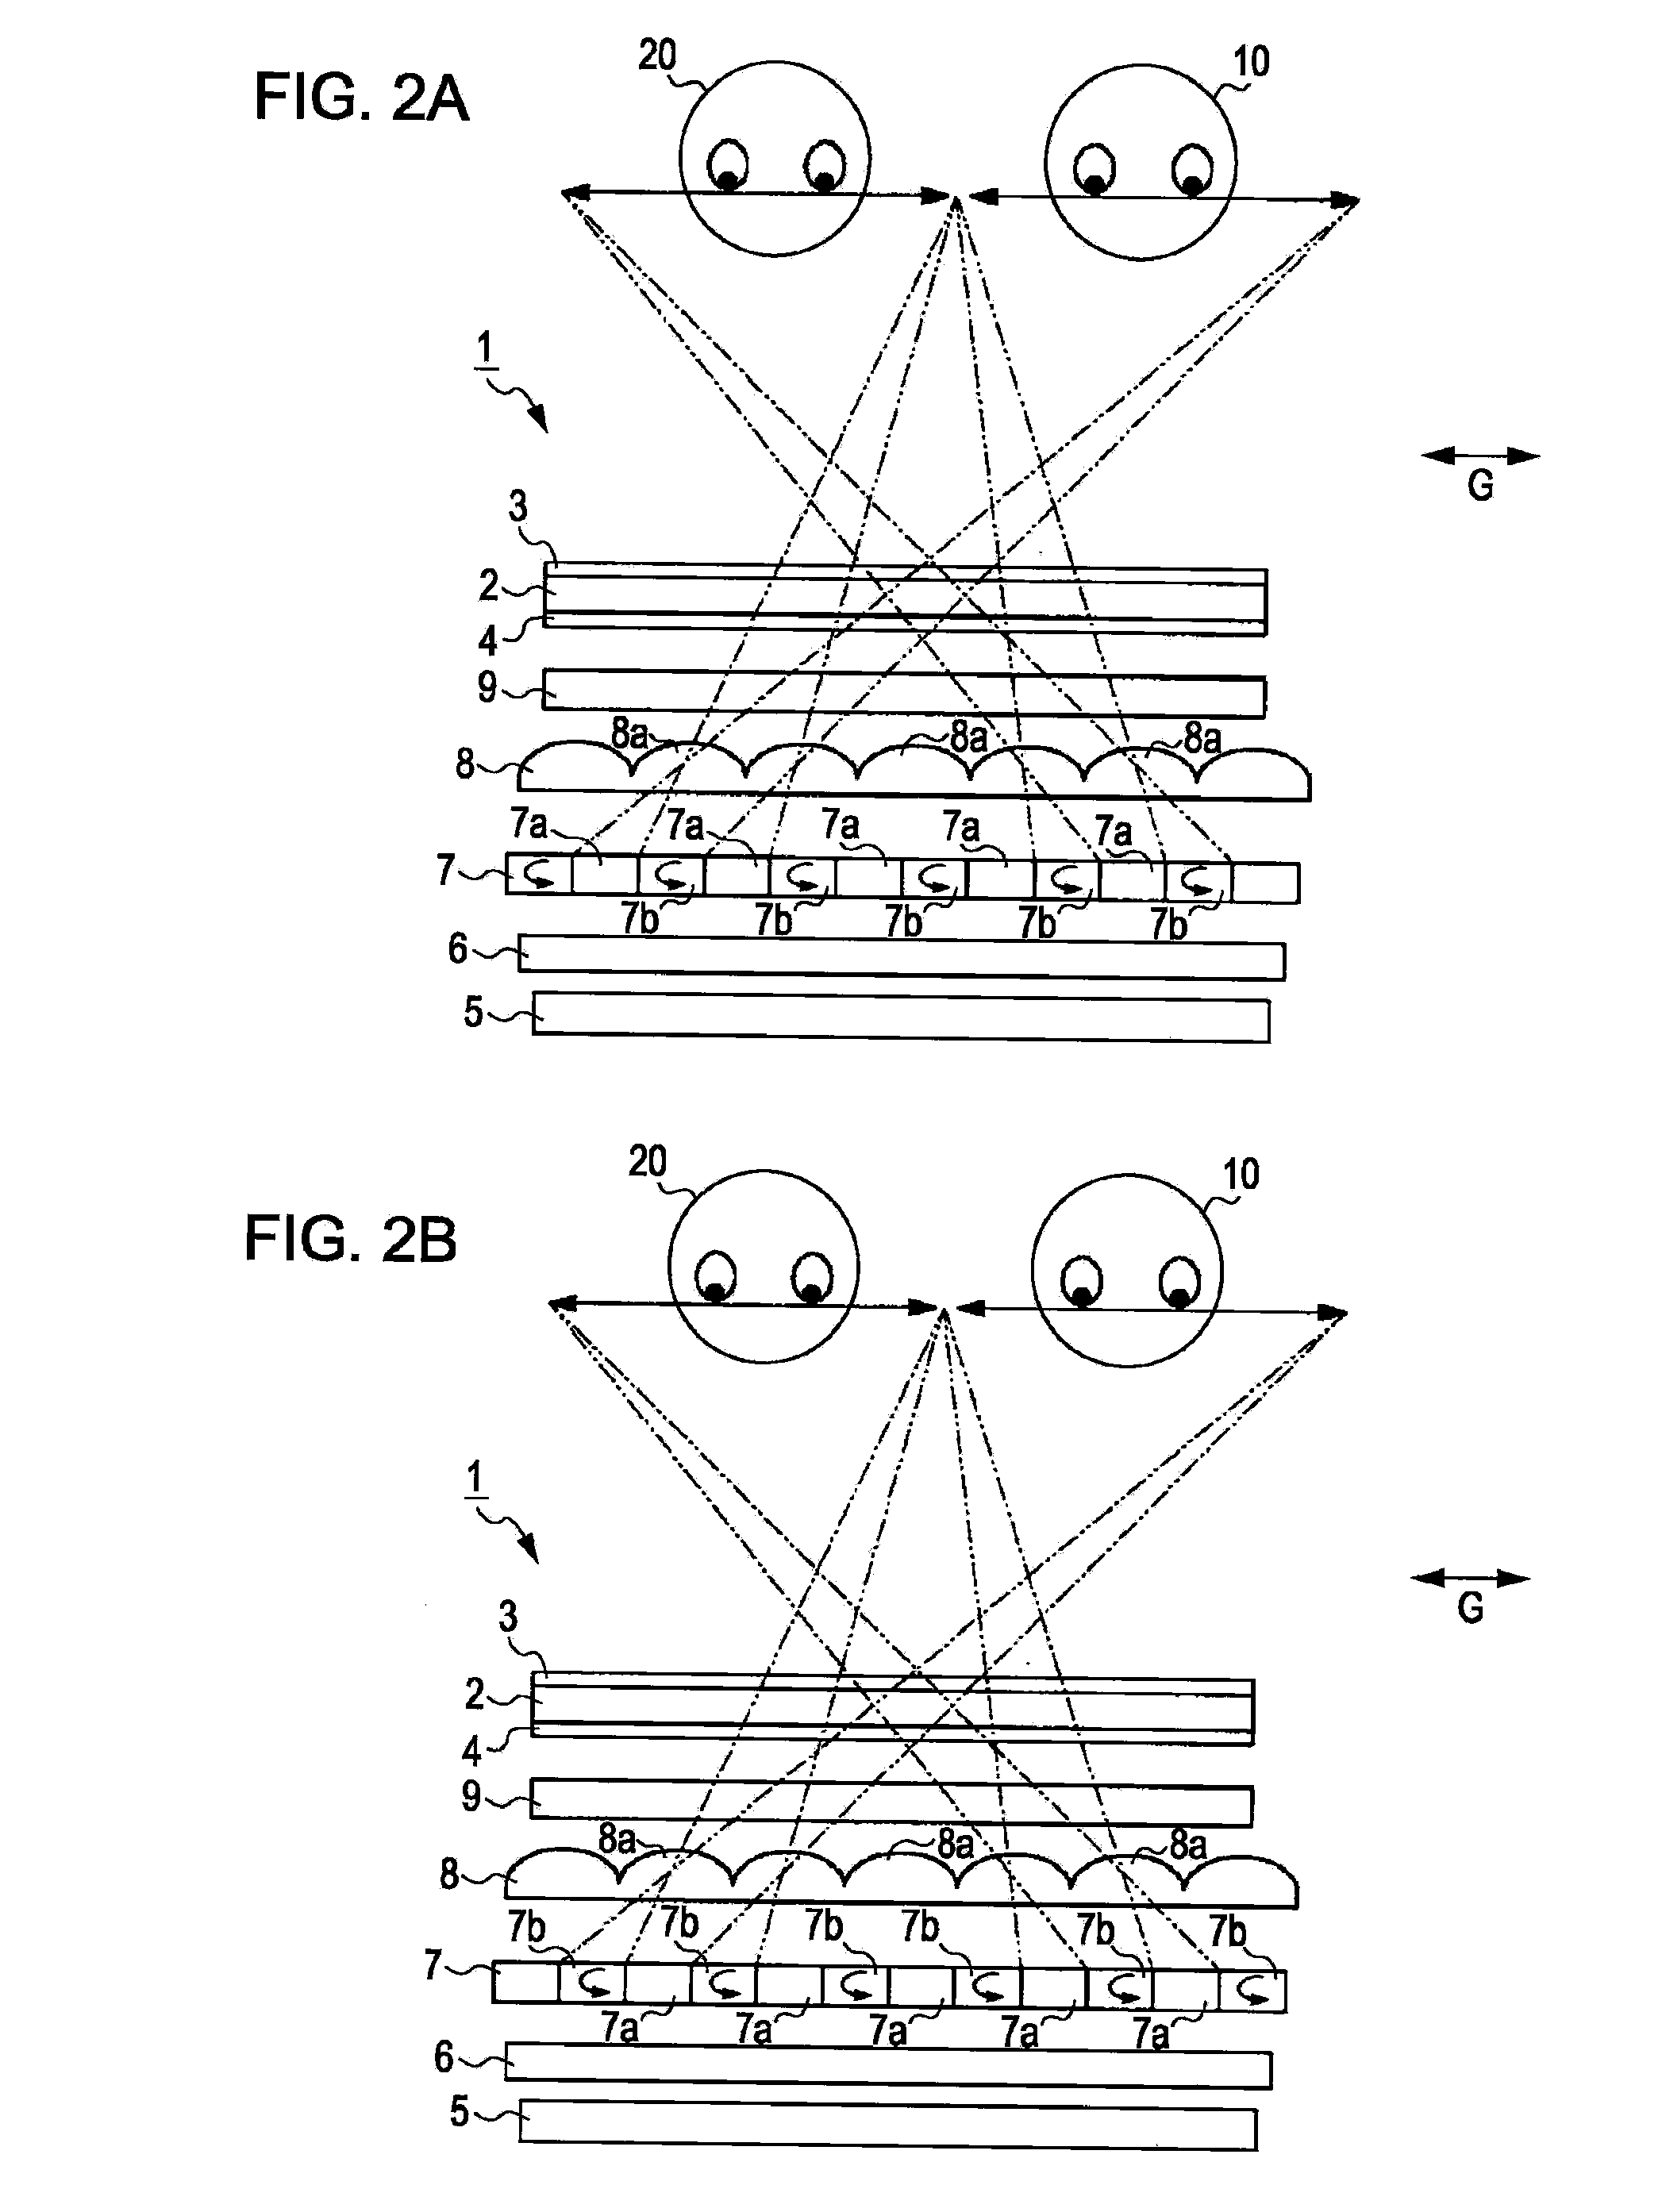 Image display and electronic device